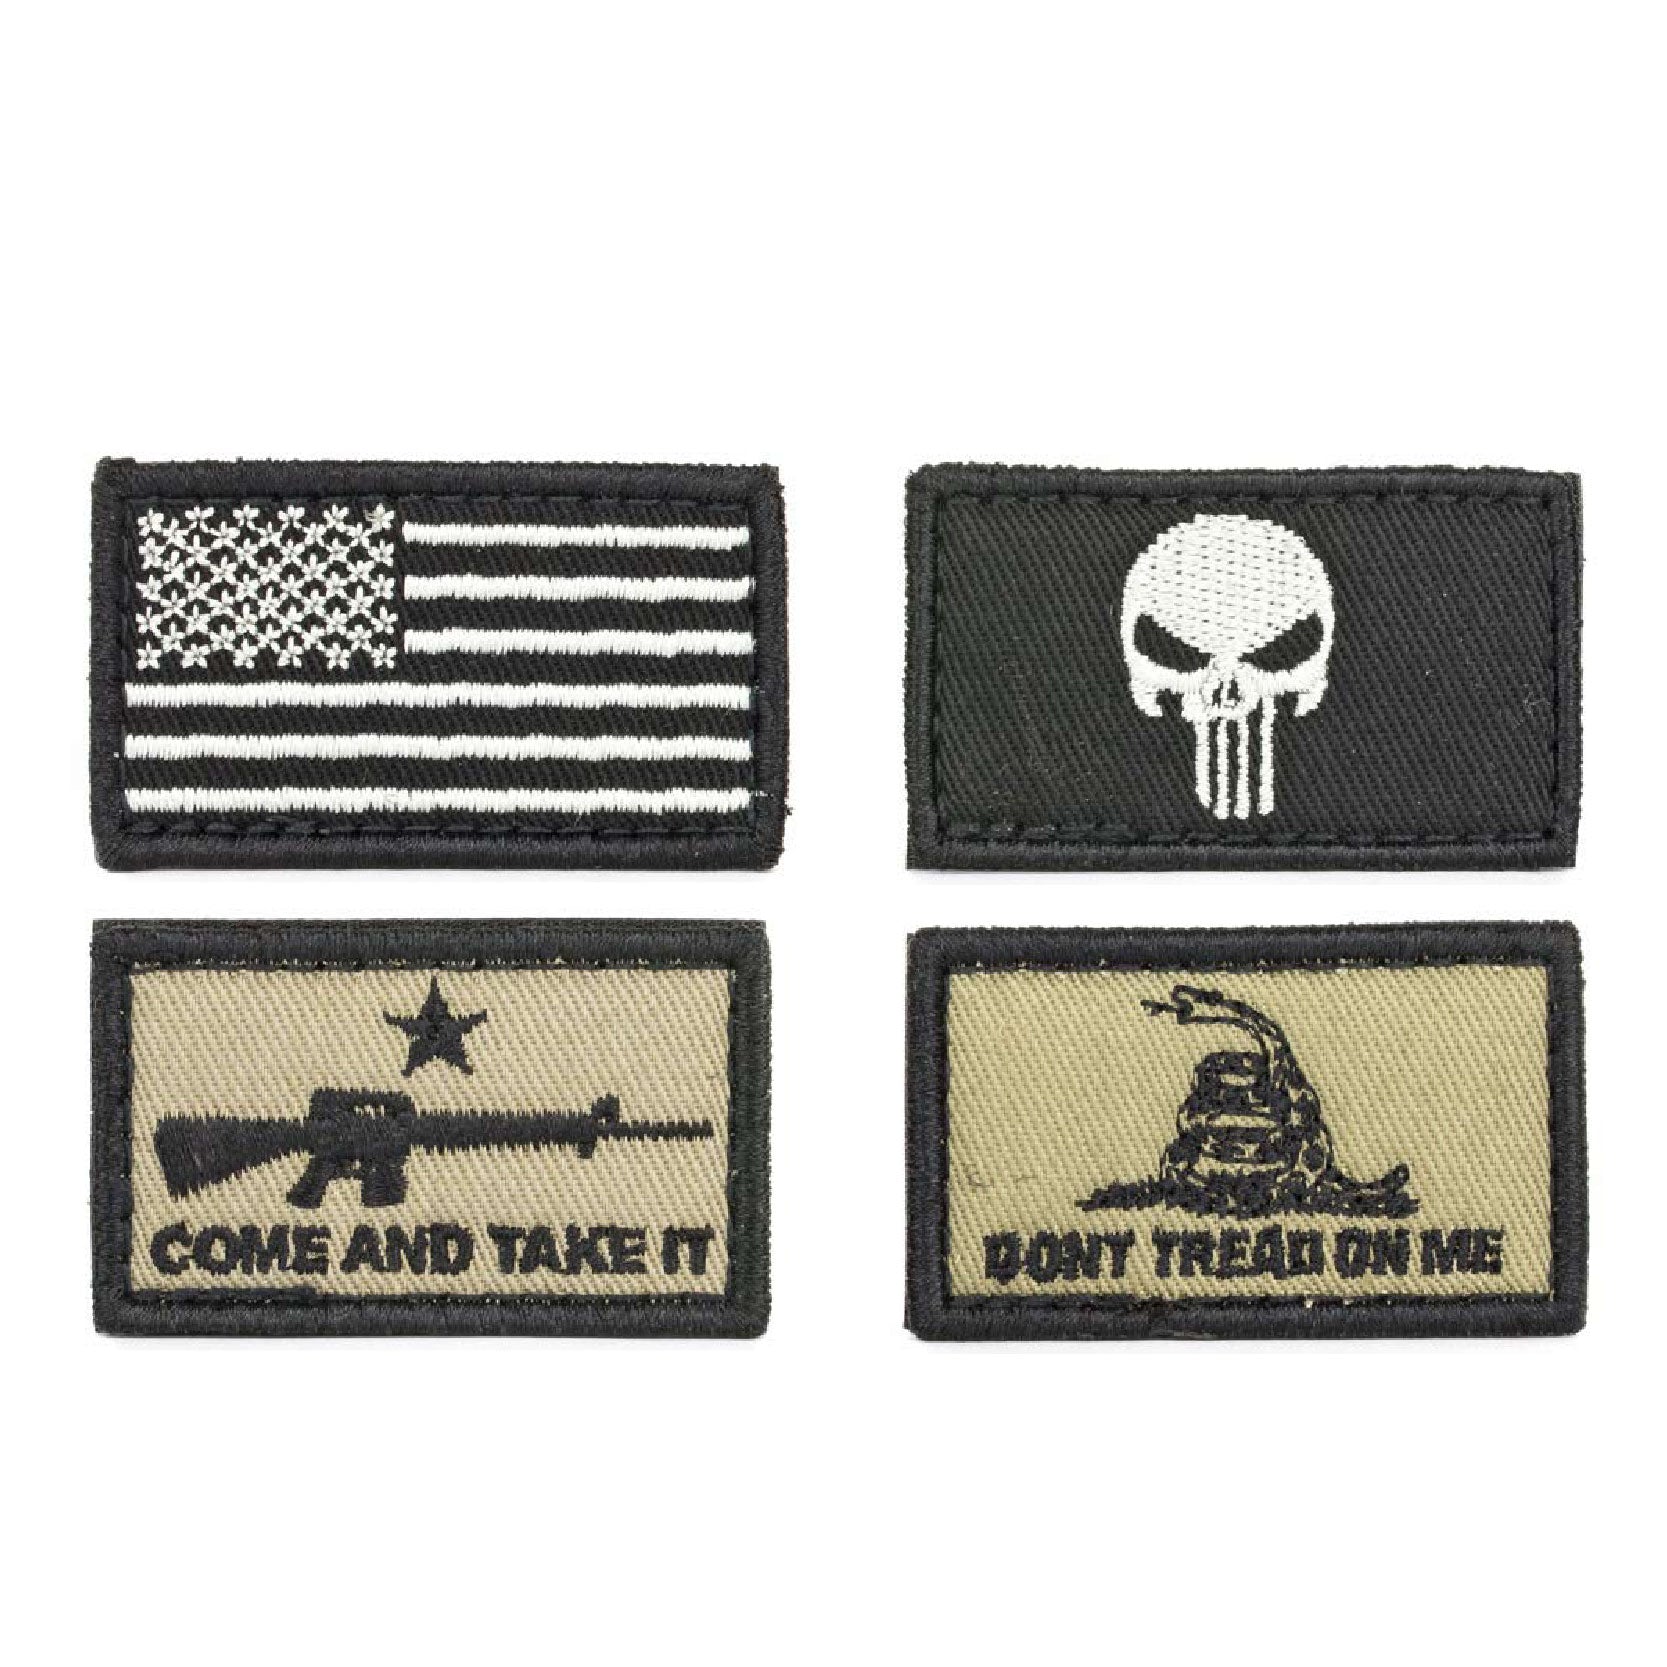 Walker's Patriot Patch Kit - 4 Assorted Patches (American Flag Version)